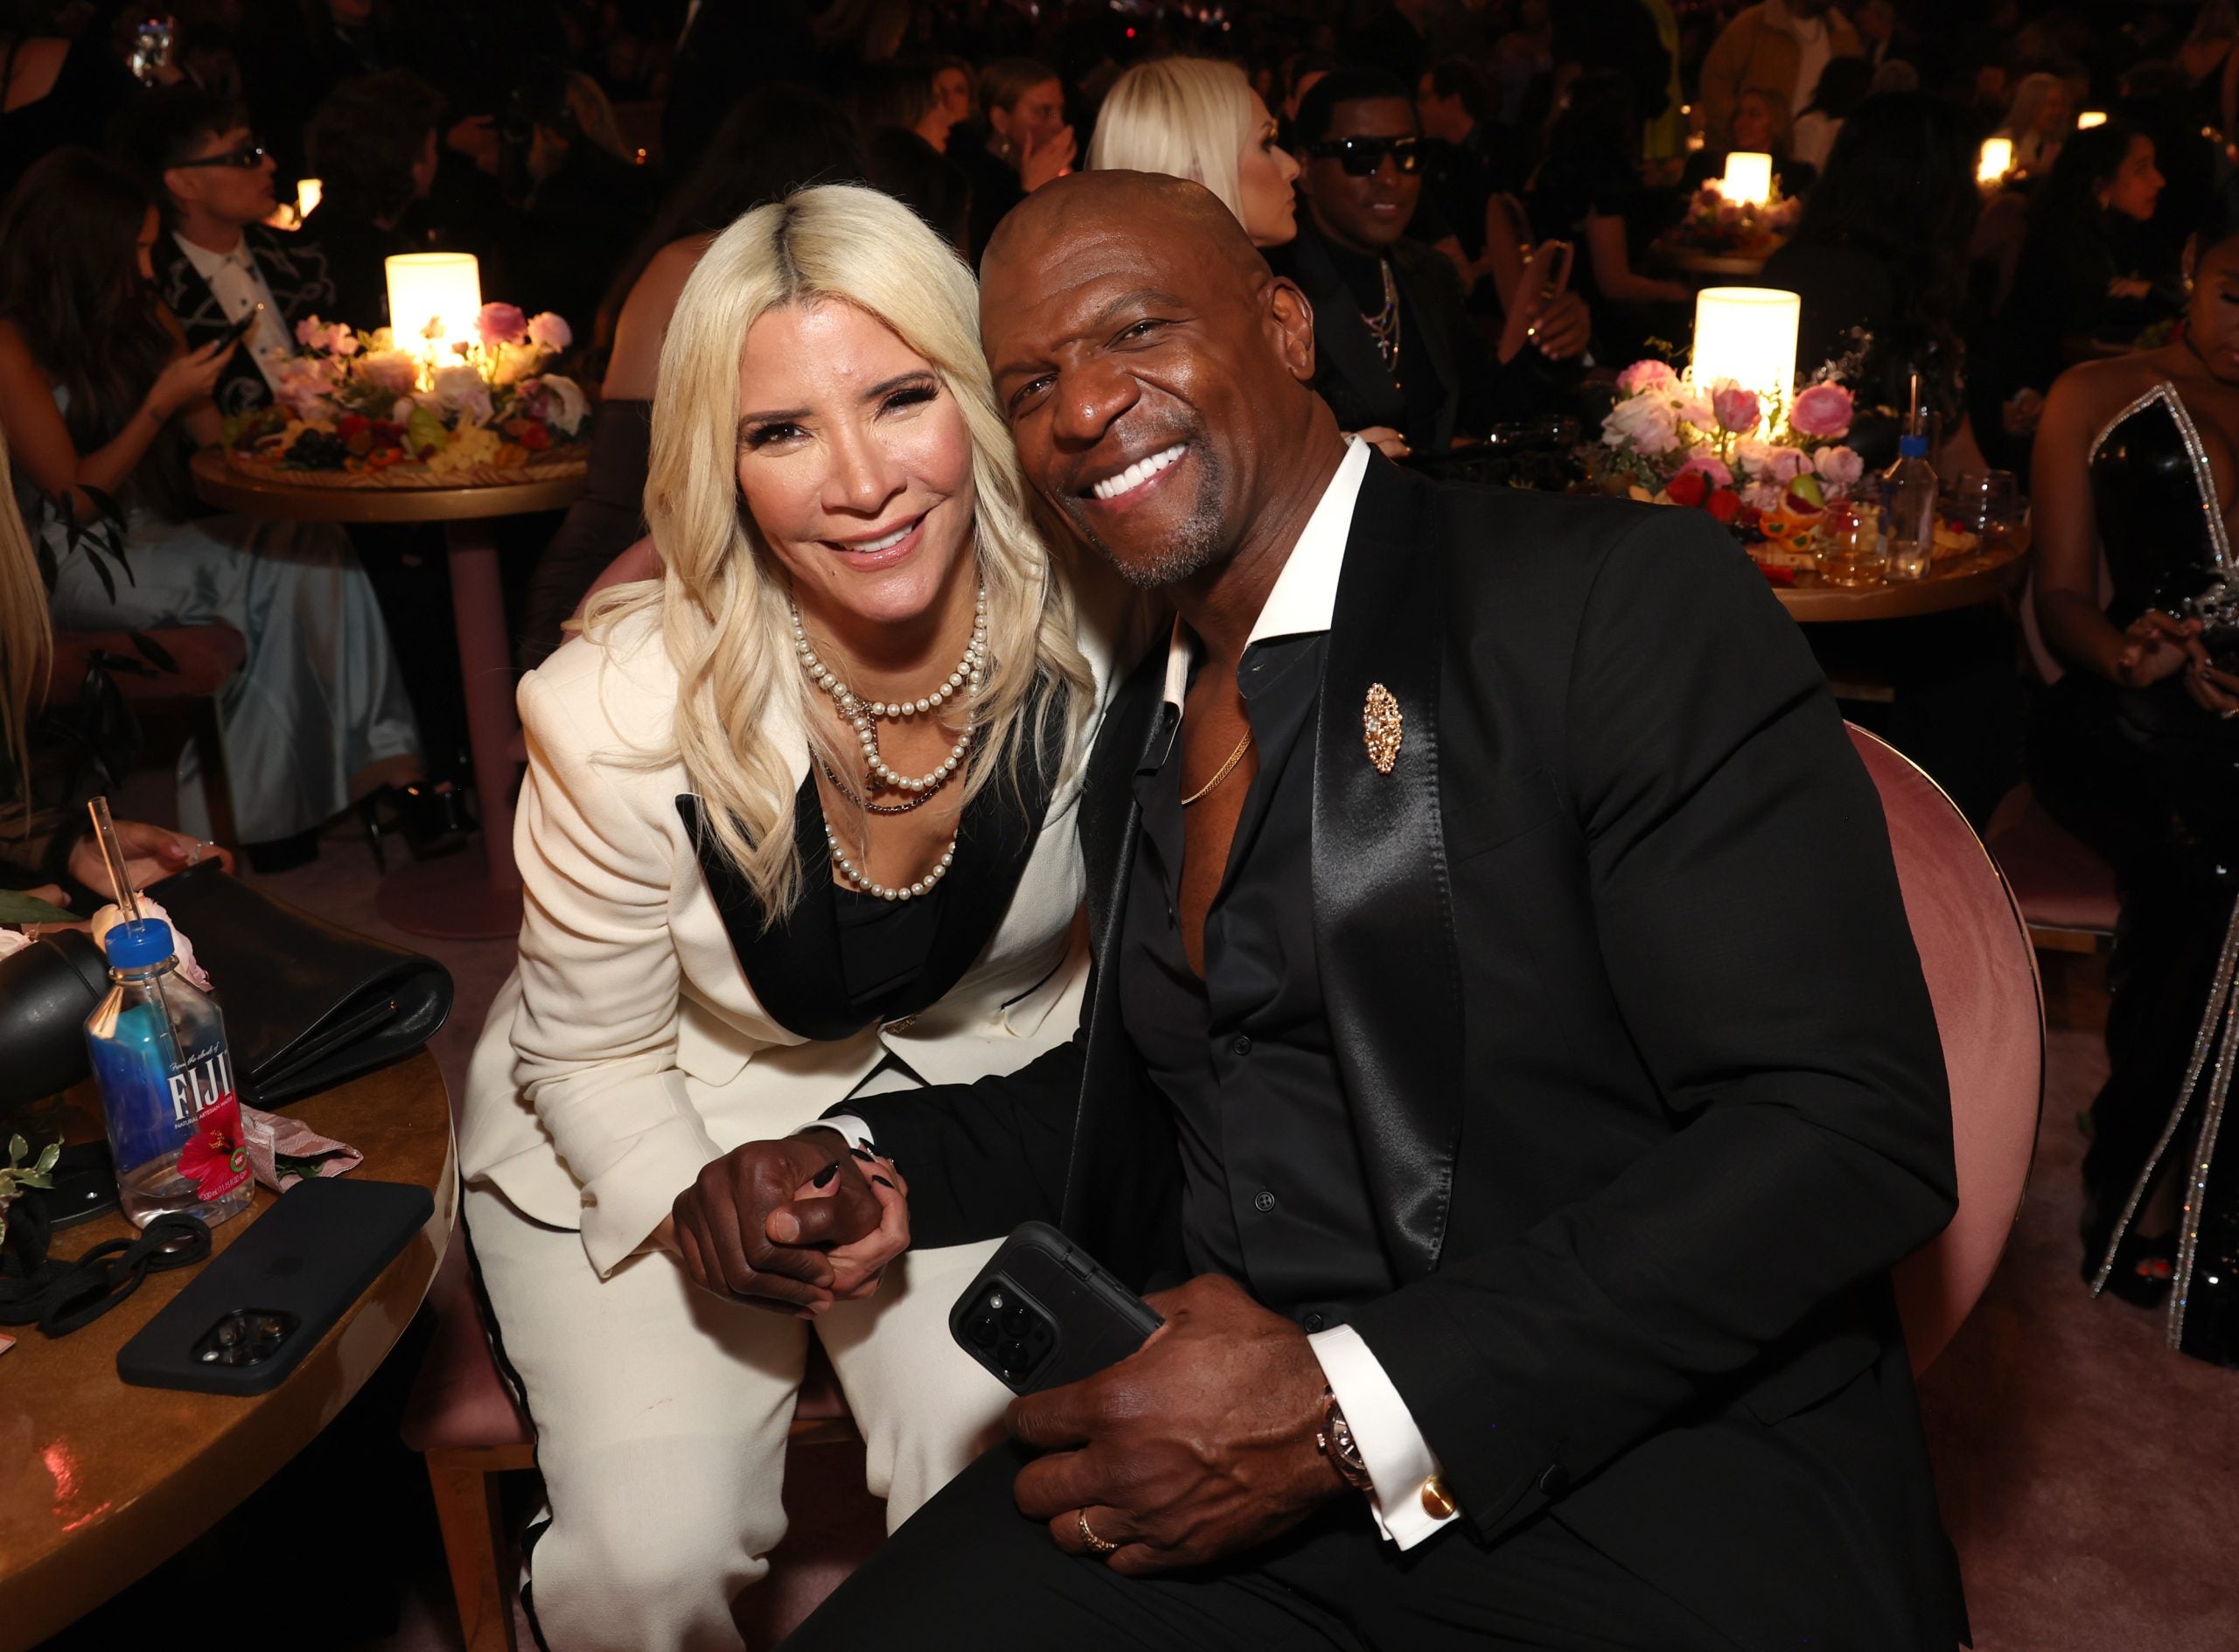 Terry Crews Sets The Record Straight For People Who Question Wife Rebecca's Racial Identity: 'She's Black'